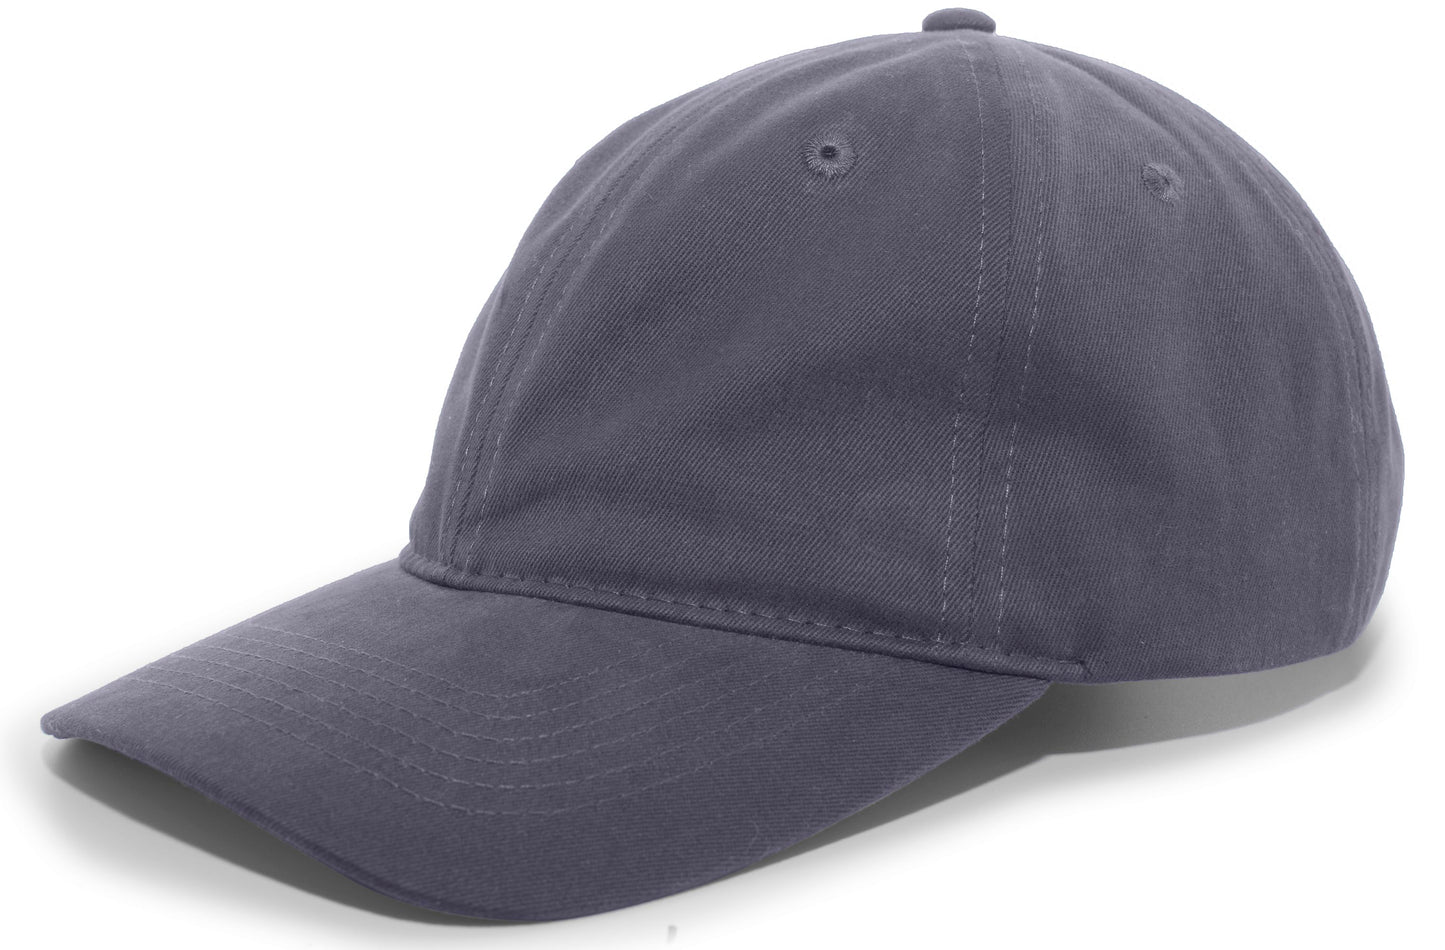 PACIFIC HEADWEAR - BRUSHED COTTON TWILL BUCKLE STRAP ADJUSTABLE CAP - 201C